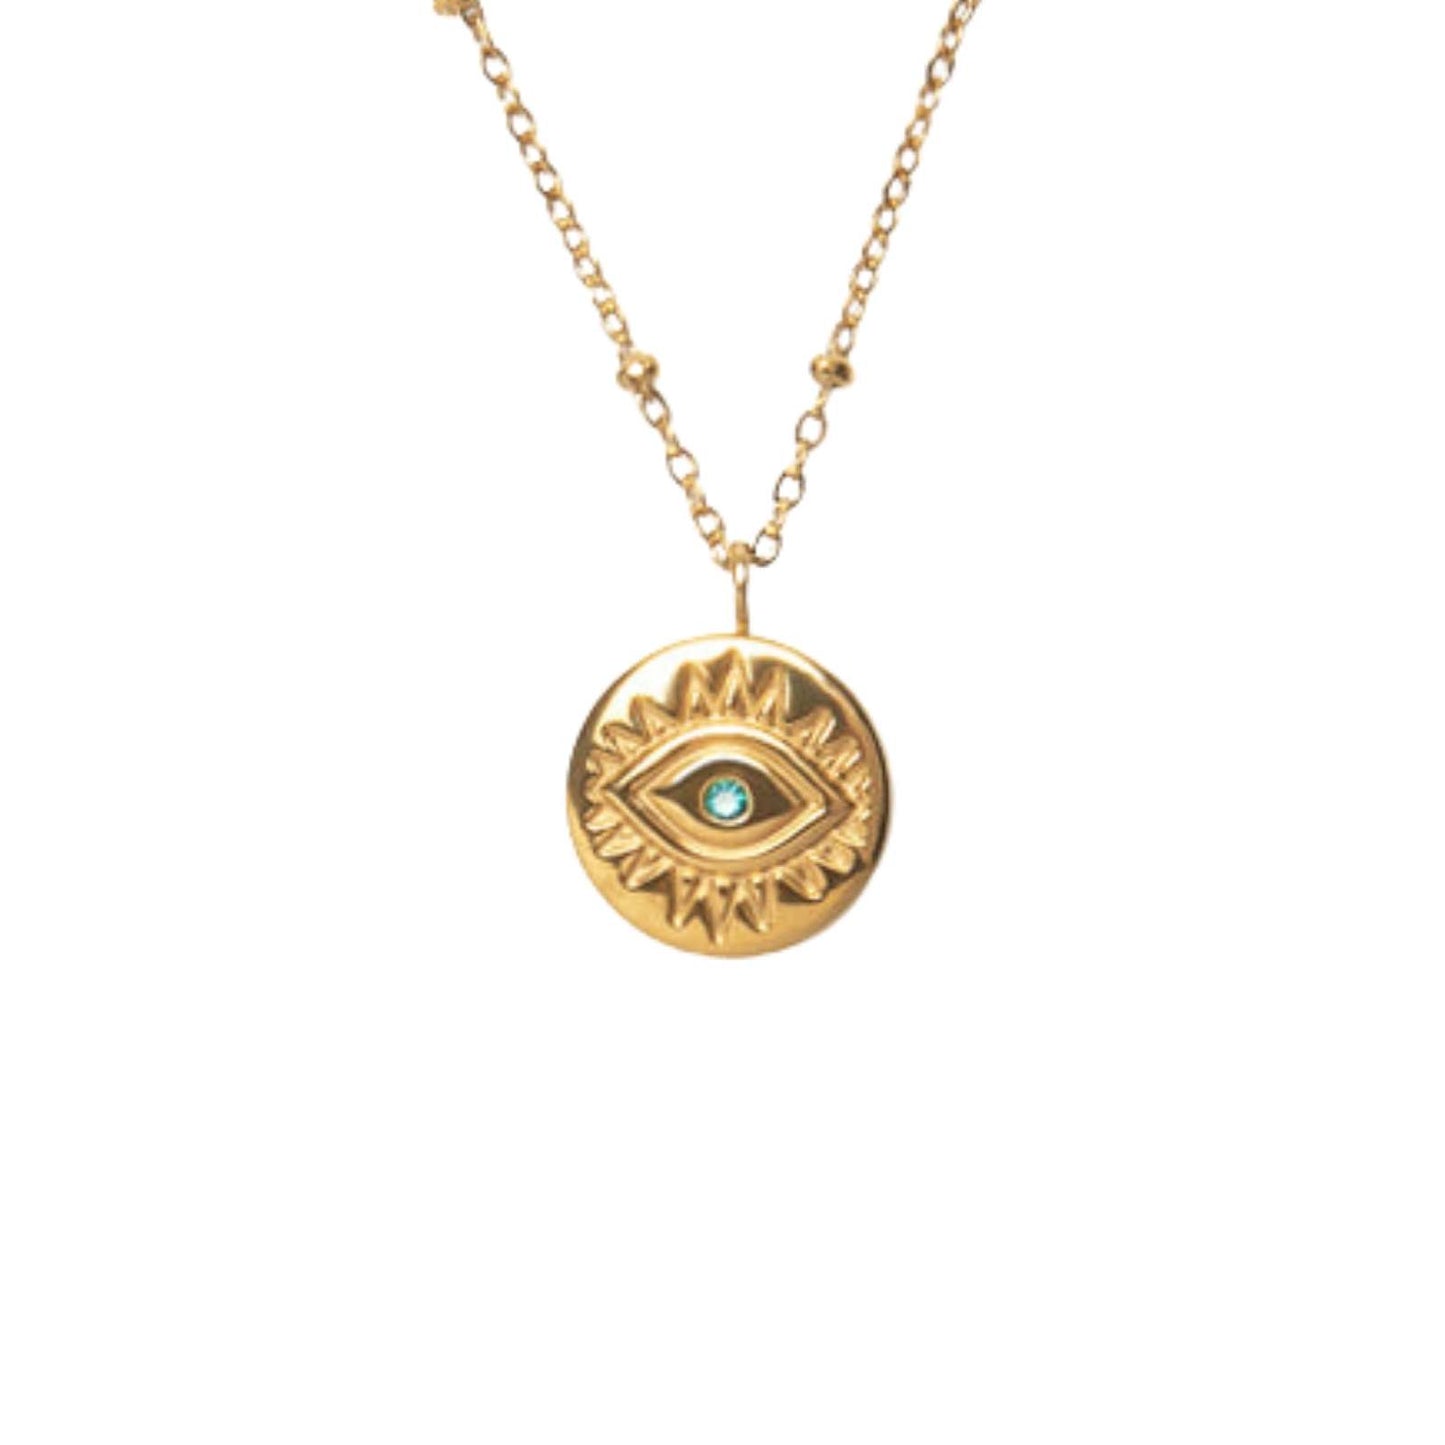 Protection Necklace, 18K Gold Plated Dainty Evil Eye Necklace With Blue Diamonte - Hypoallergenic & Water-Resistant